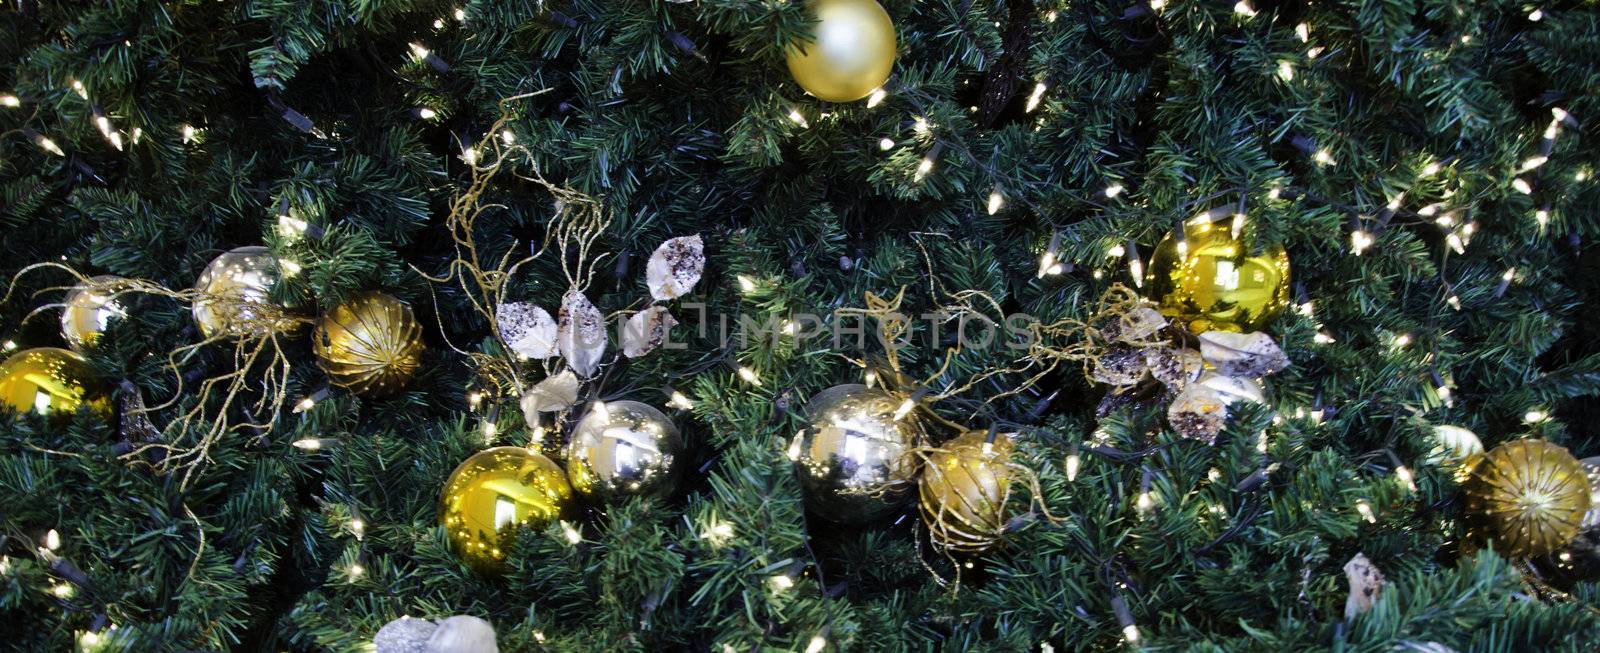 Glittering silver and white Christmas tree decorations by siraanamwong